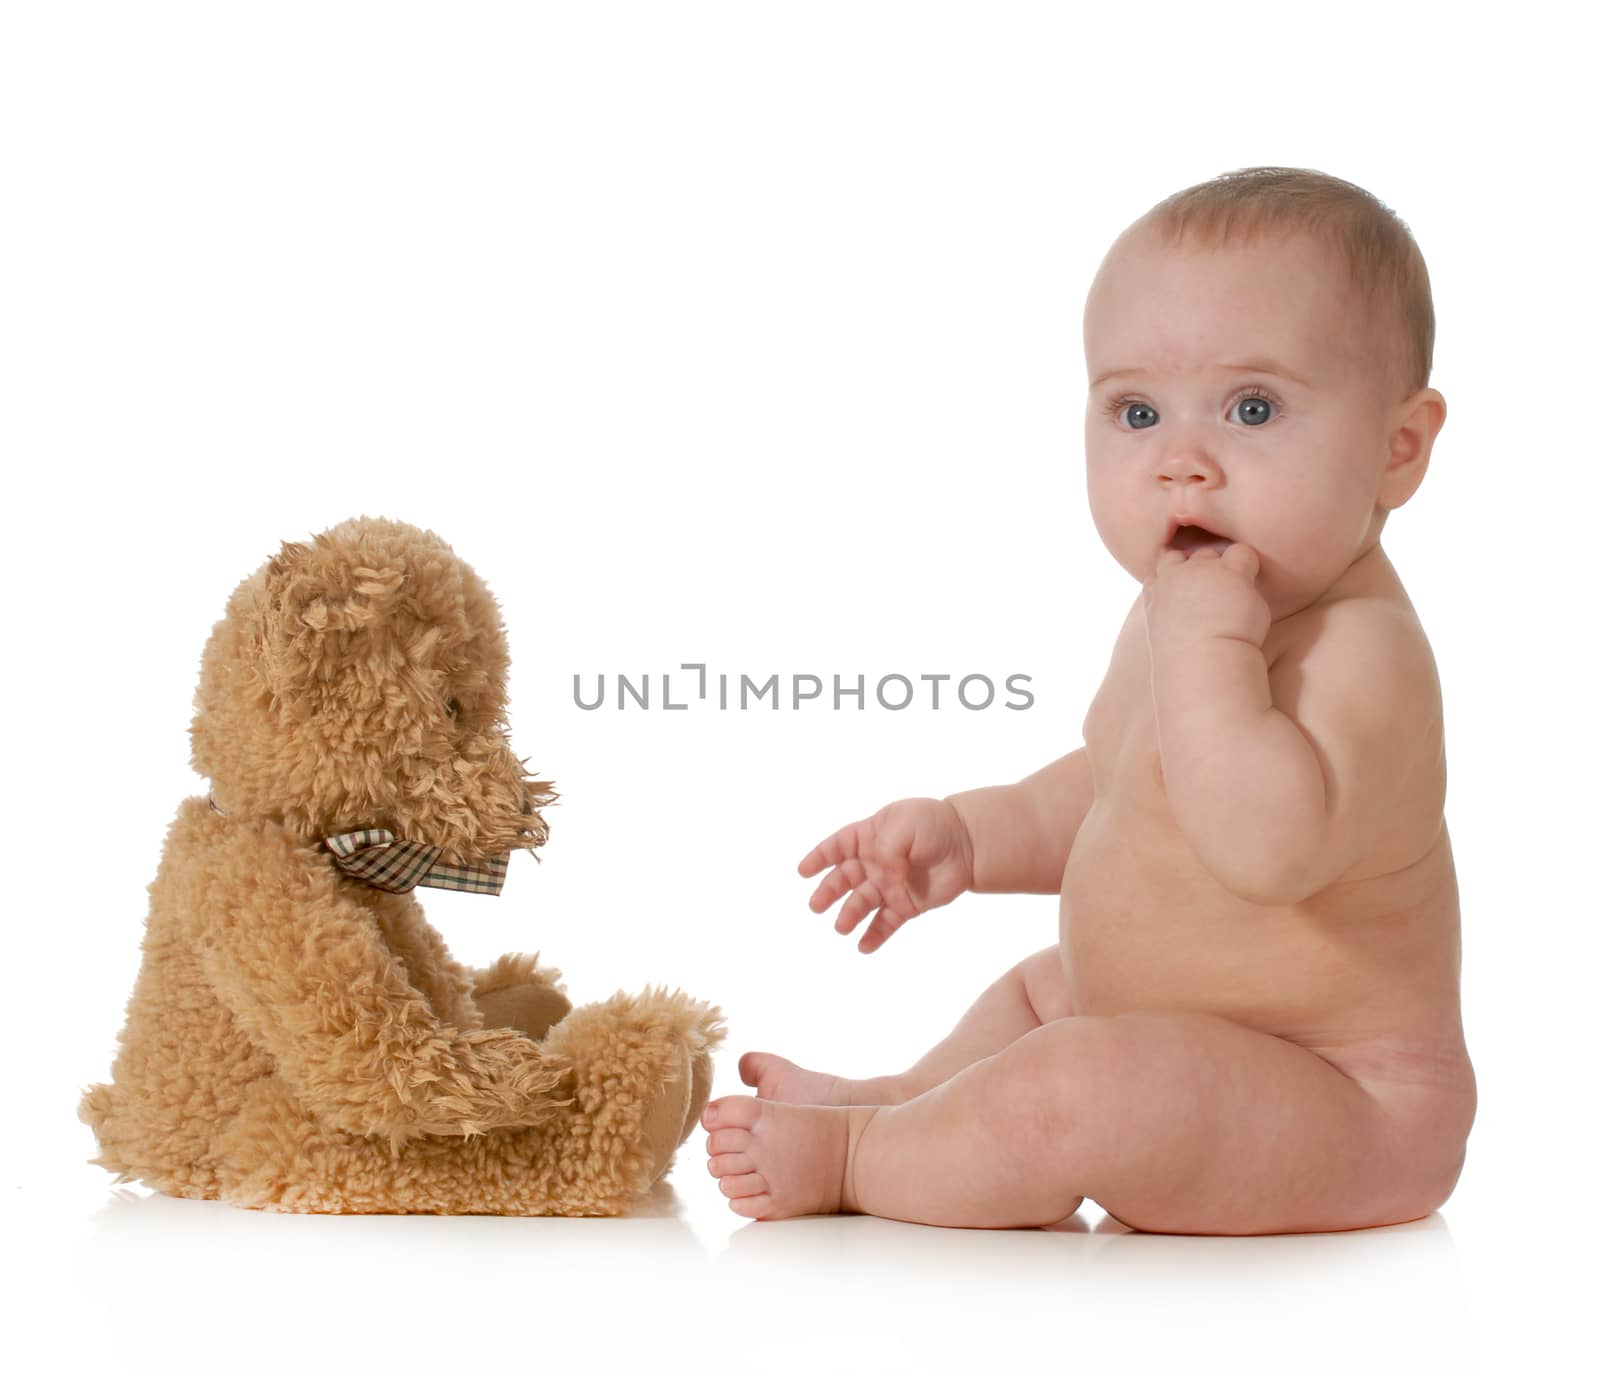 baby and teddy bear isolated on white background